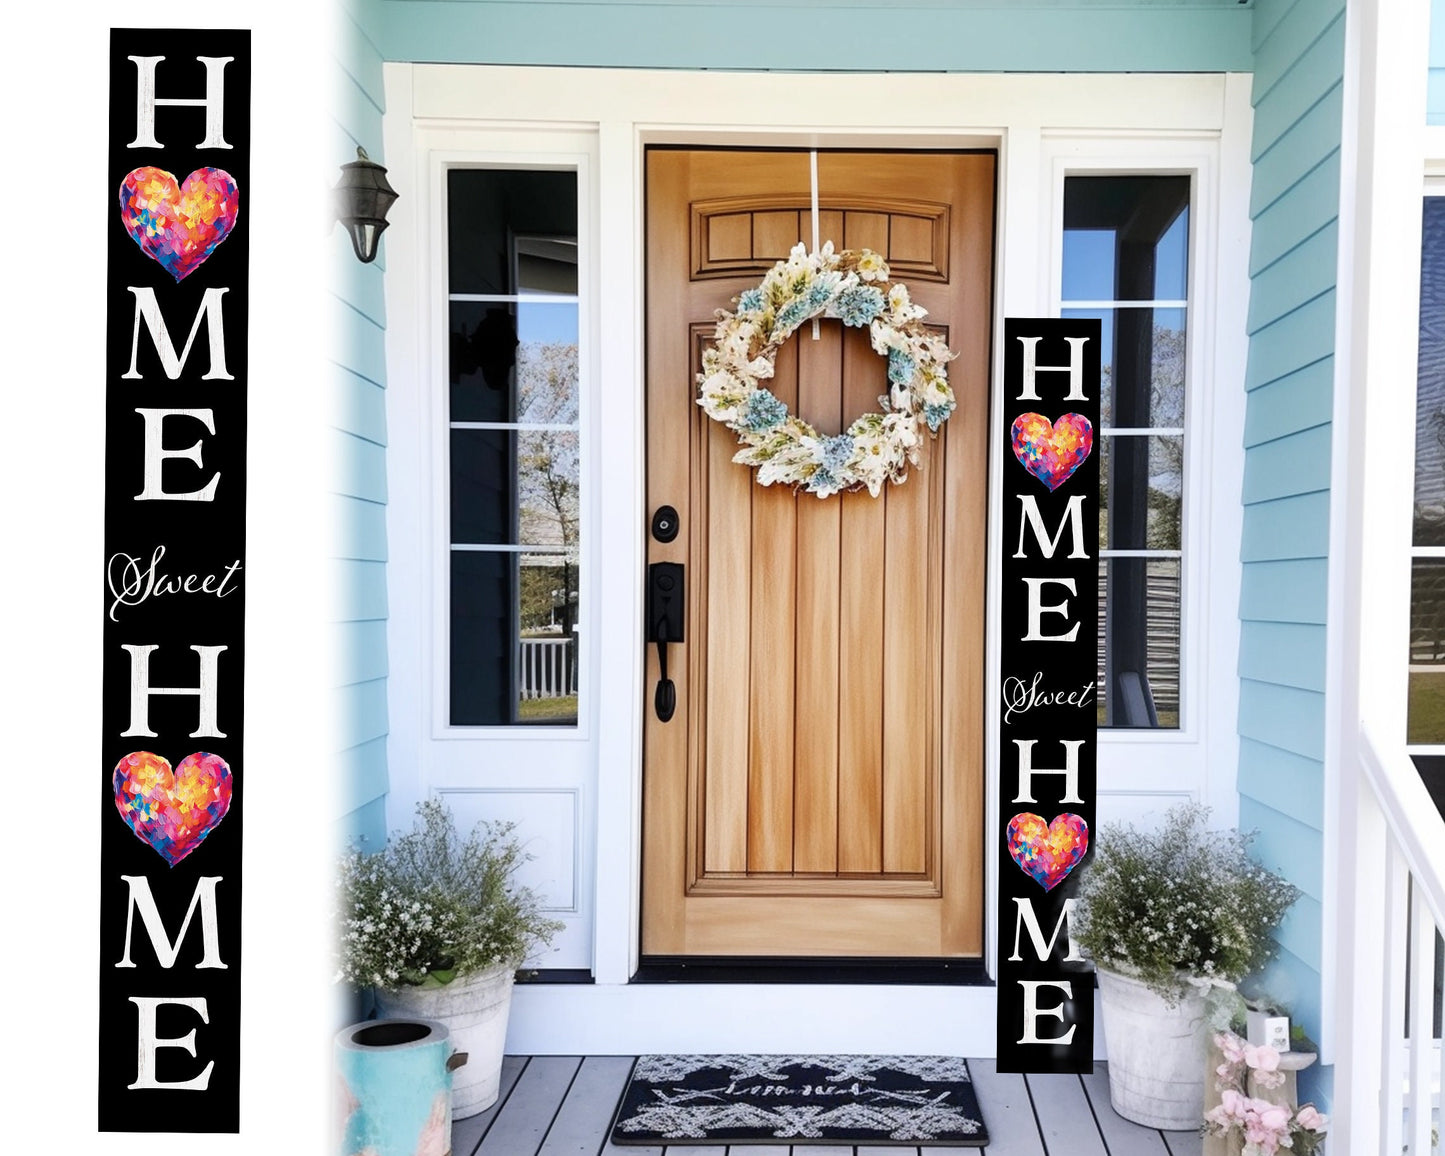 72in Heart Home Sweet Home Sign | Rustic Wood Front Door Decor | Farmhouse Porch Sign Decorations | Patio Decor | Wooden Decor